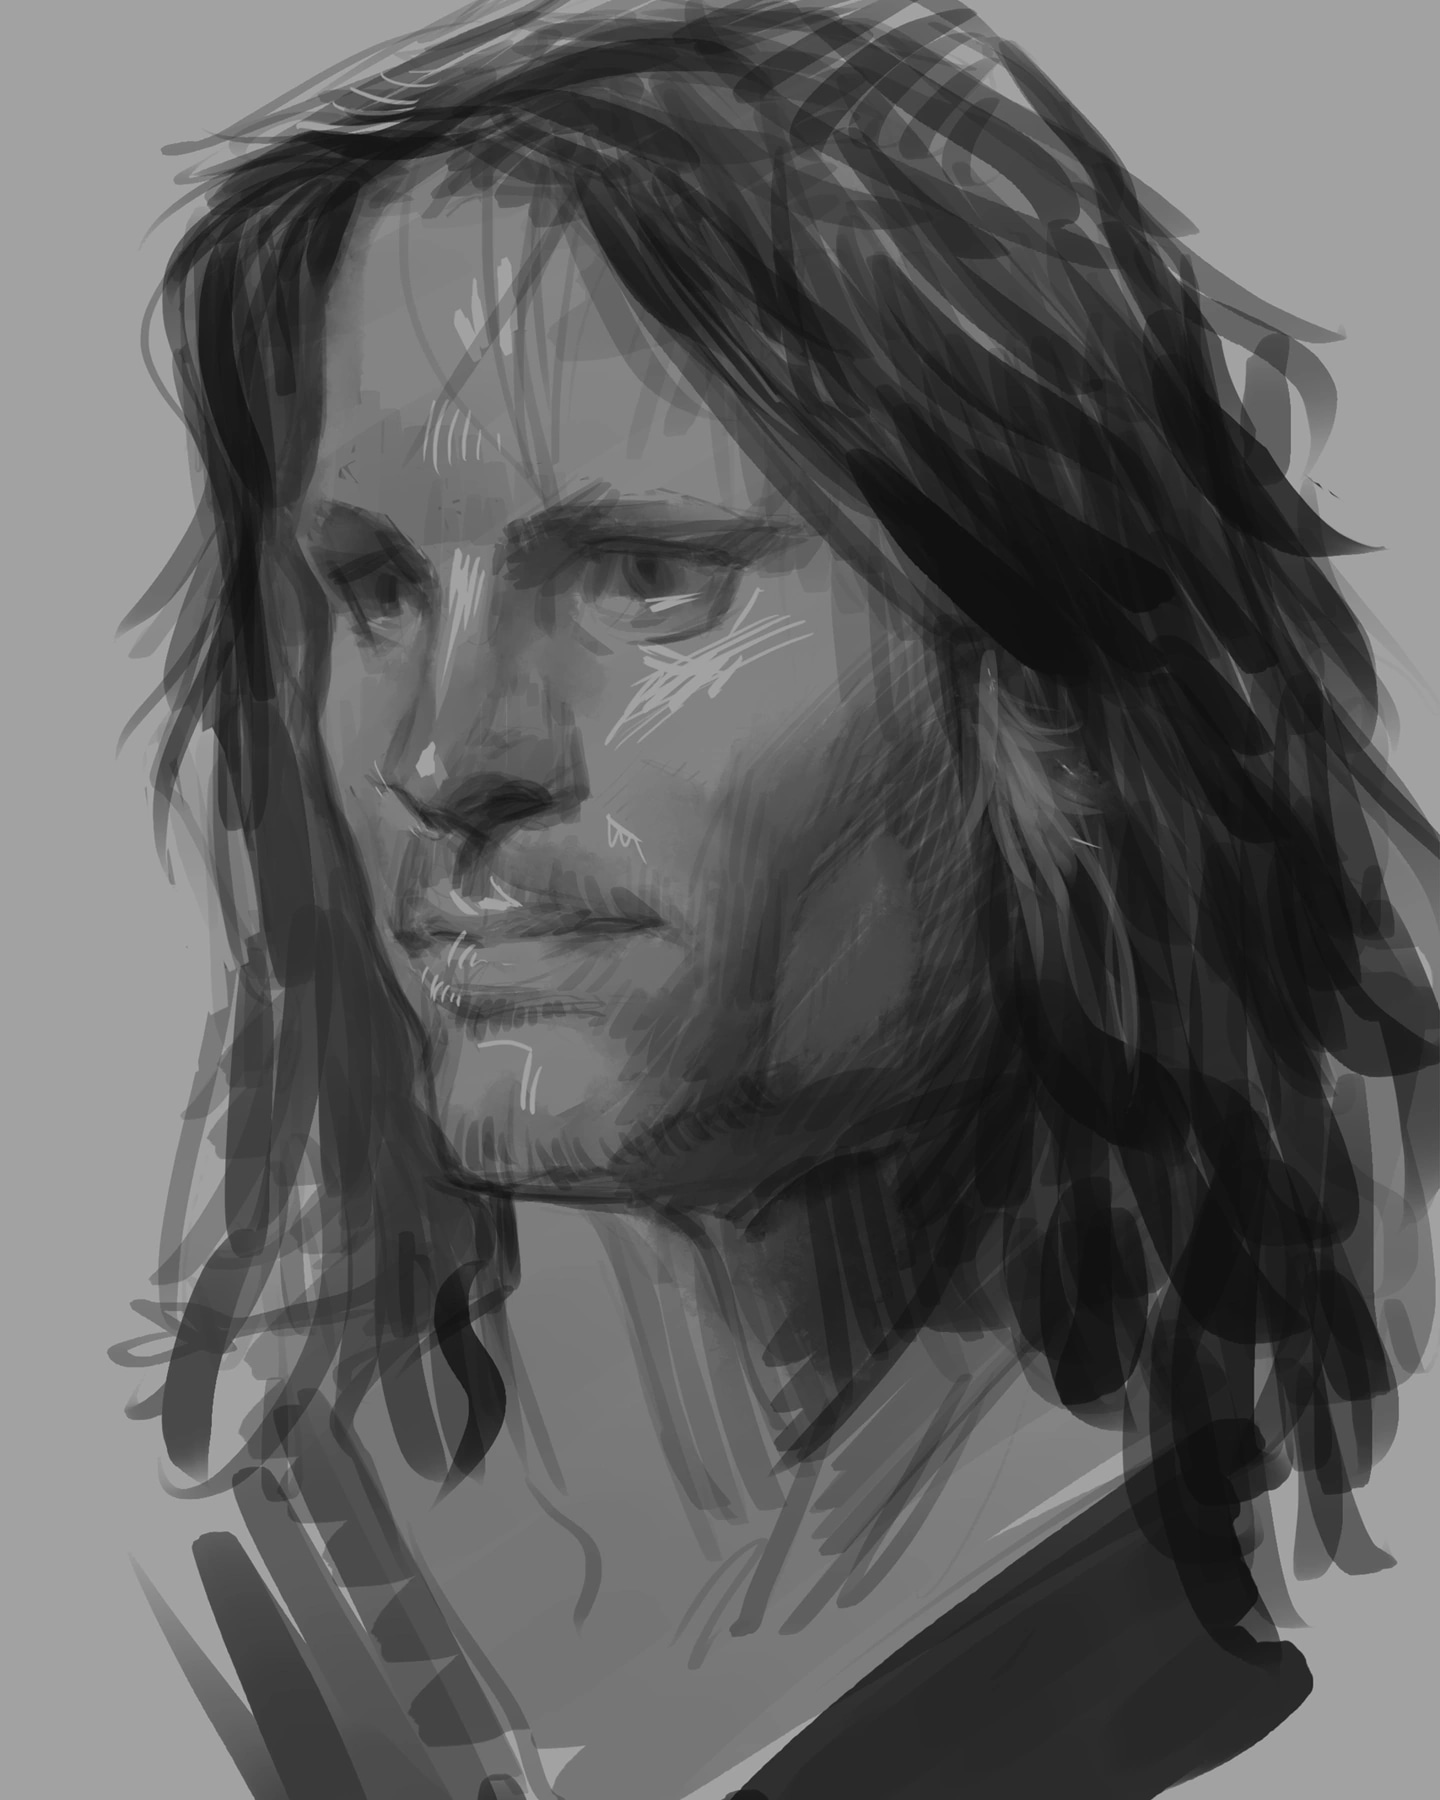 Buy LOTR Print of Aragorn Pencil Drawing Online in India - Etsy